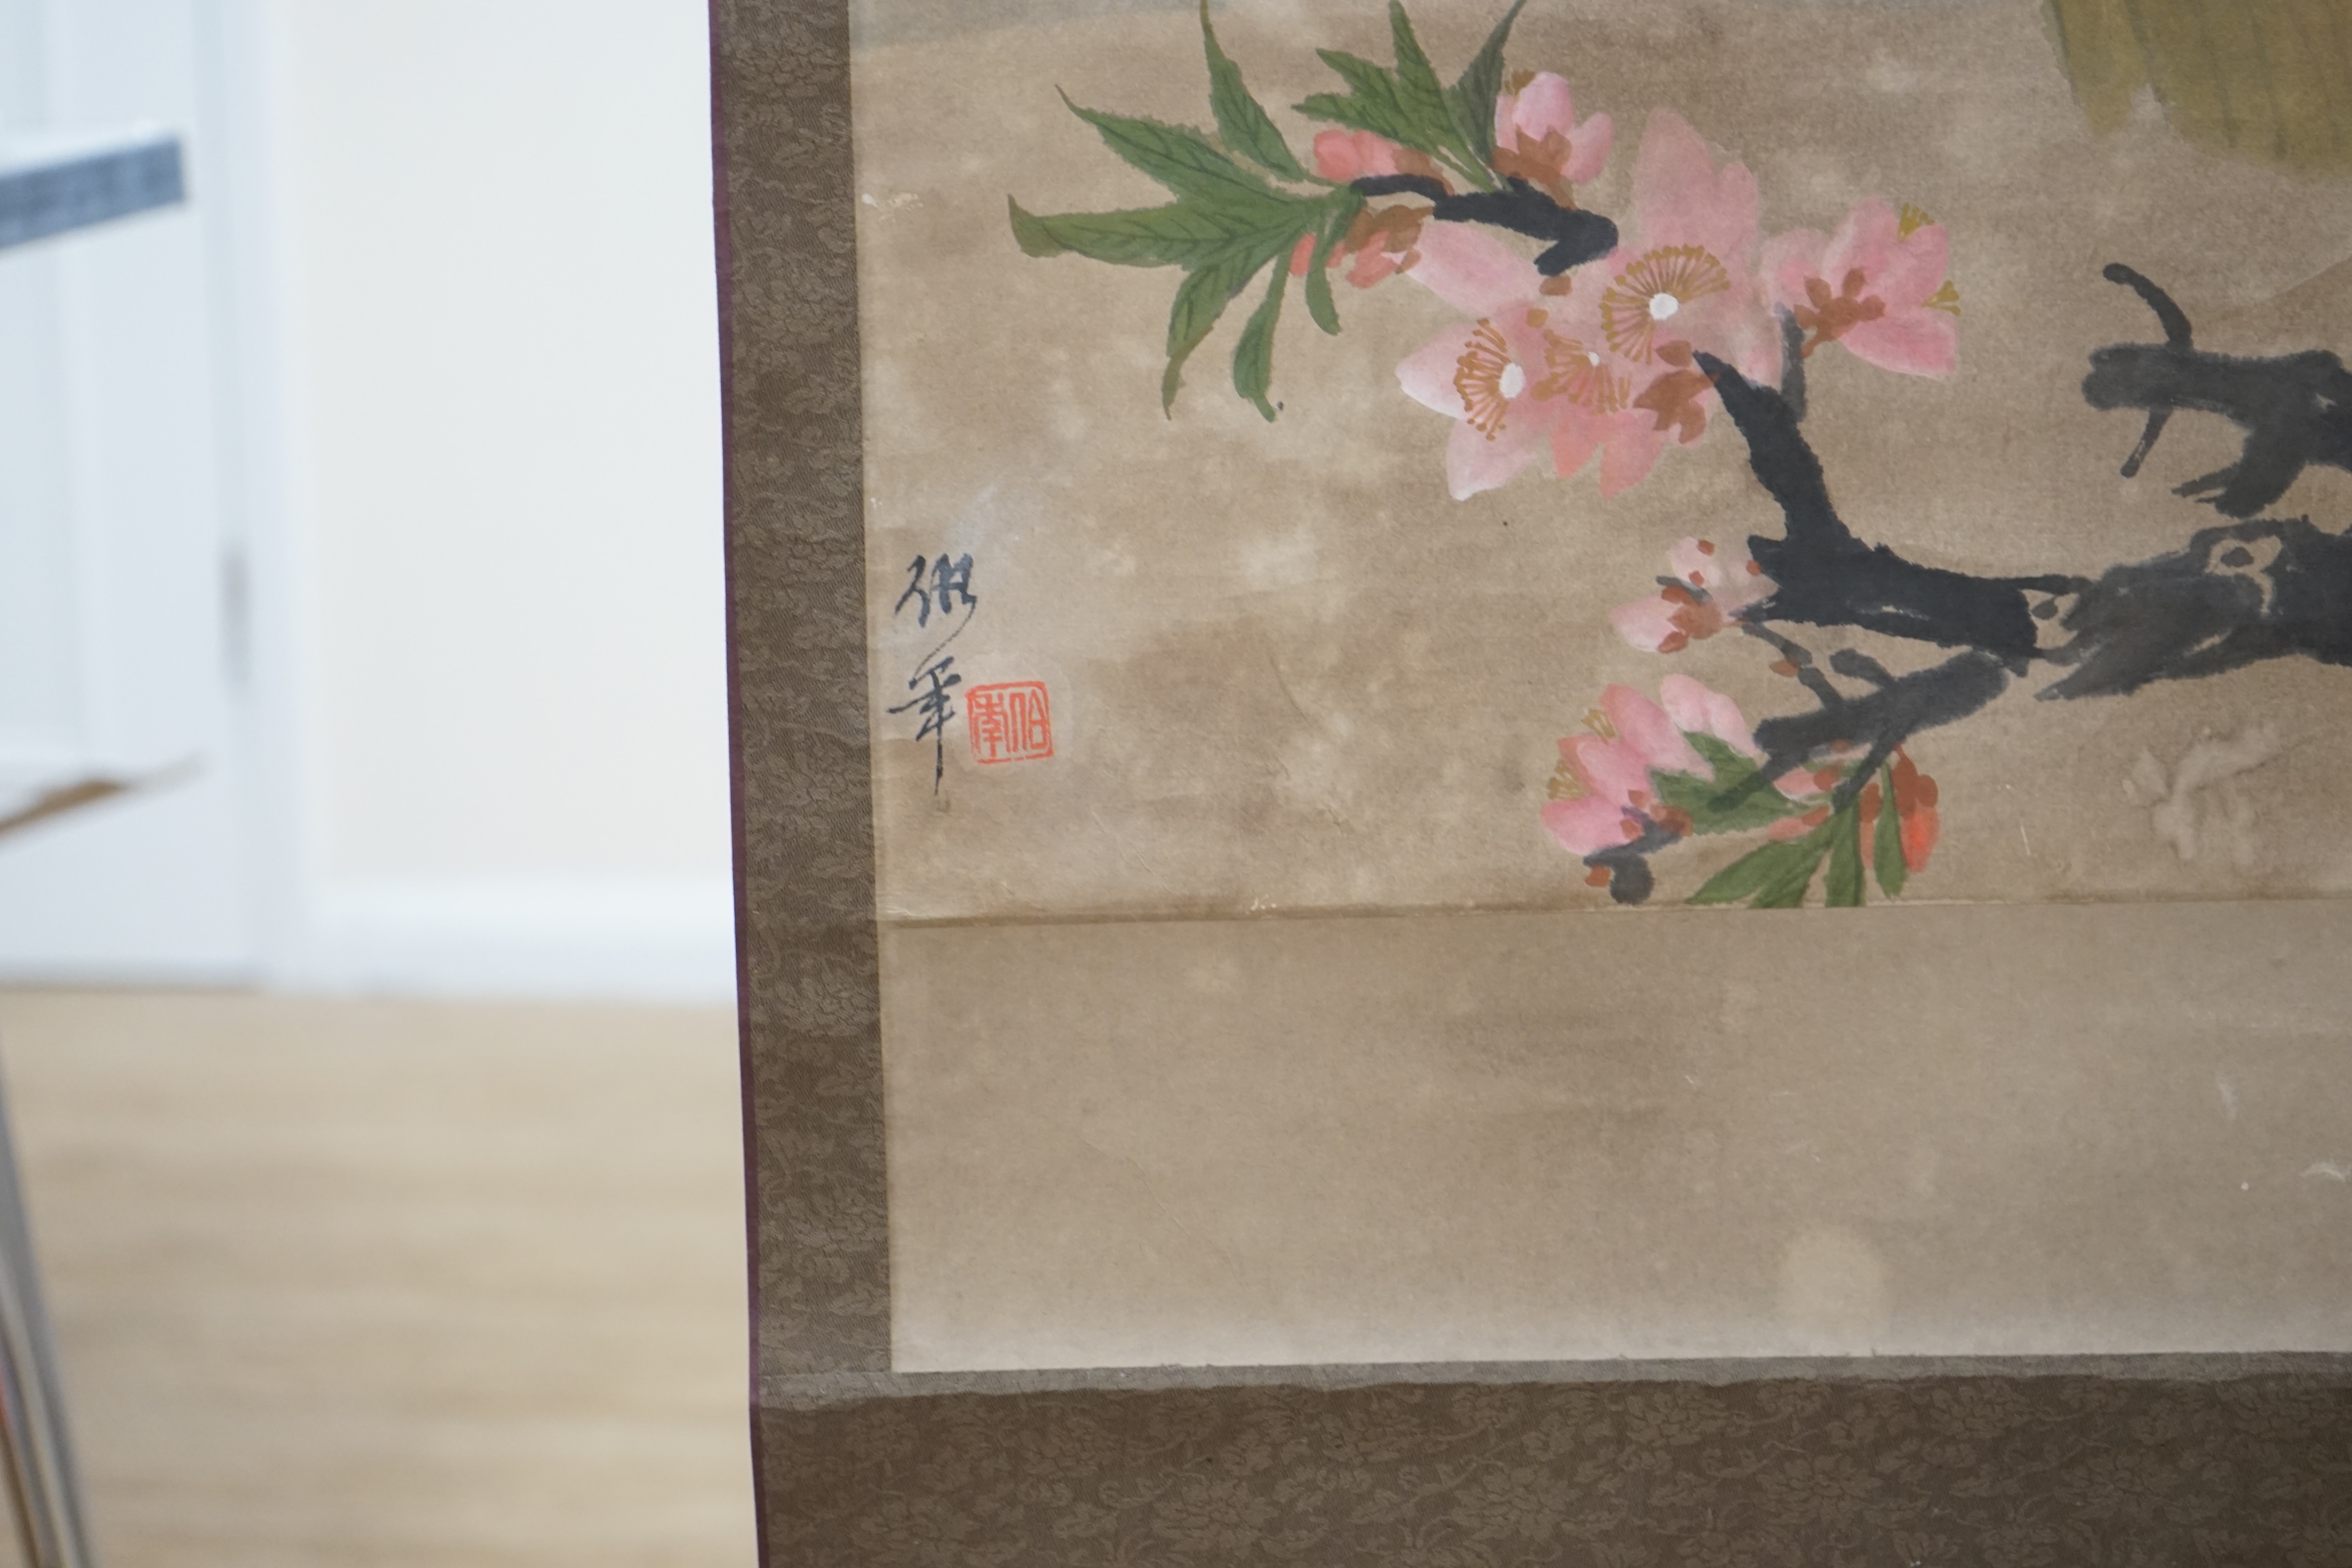 Style of Ren Yi Rei Bonian, a scroll painting of ducks. Condition - fair, some general creasing and staining